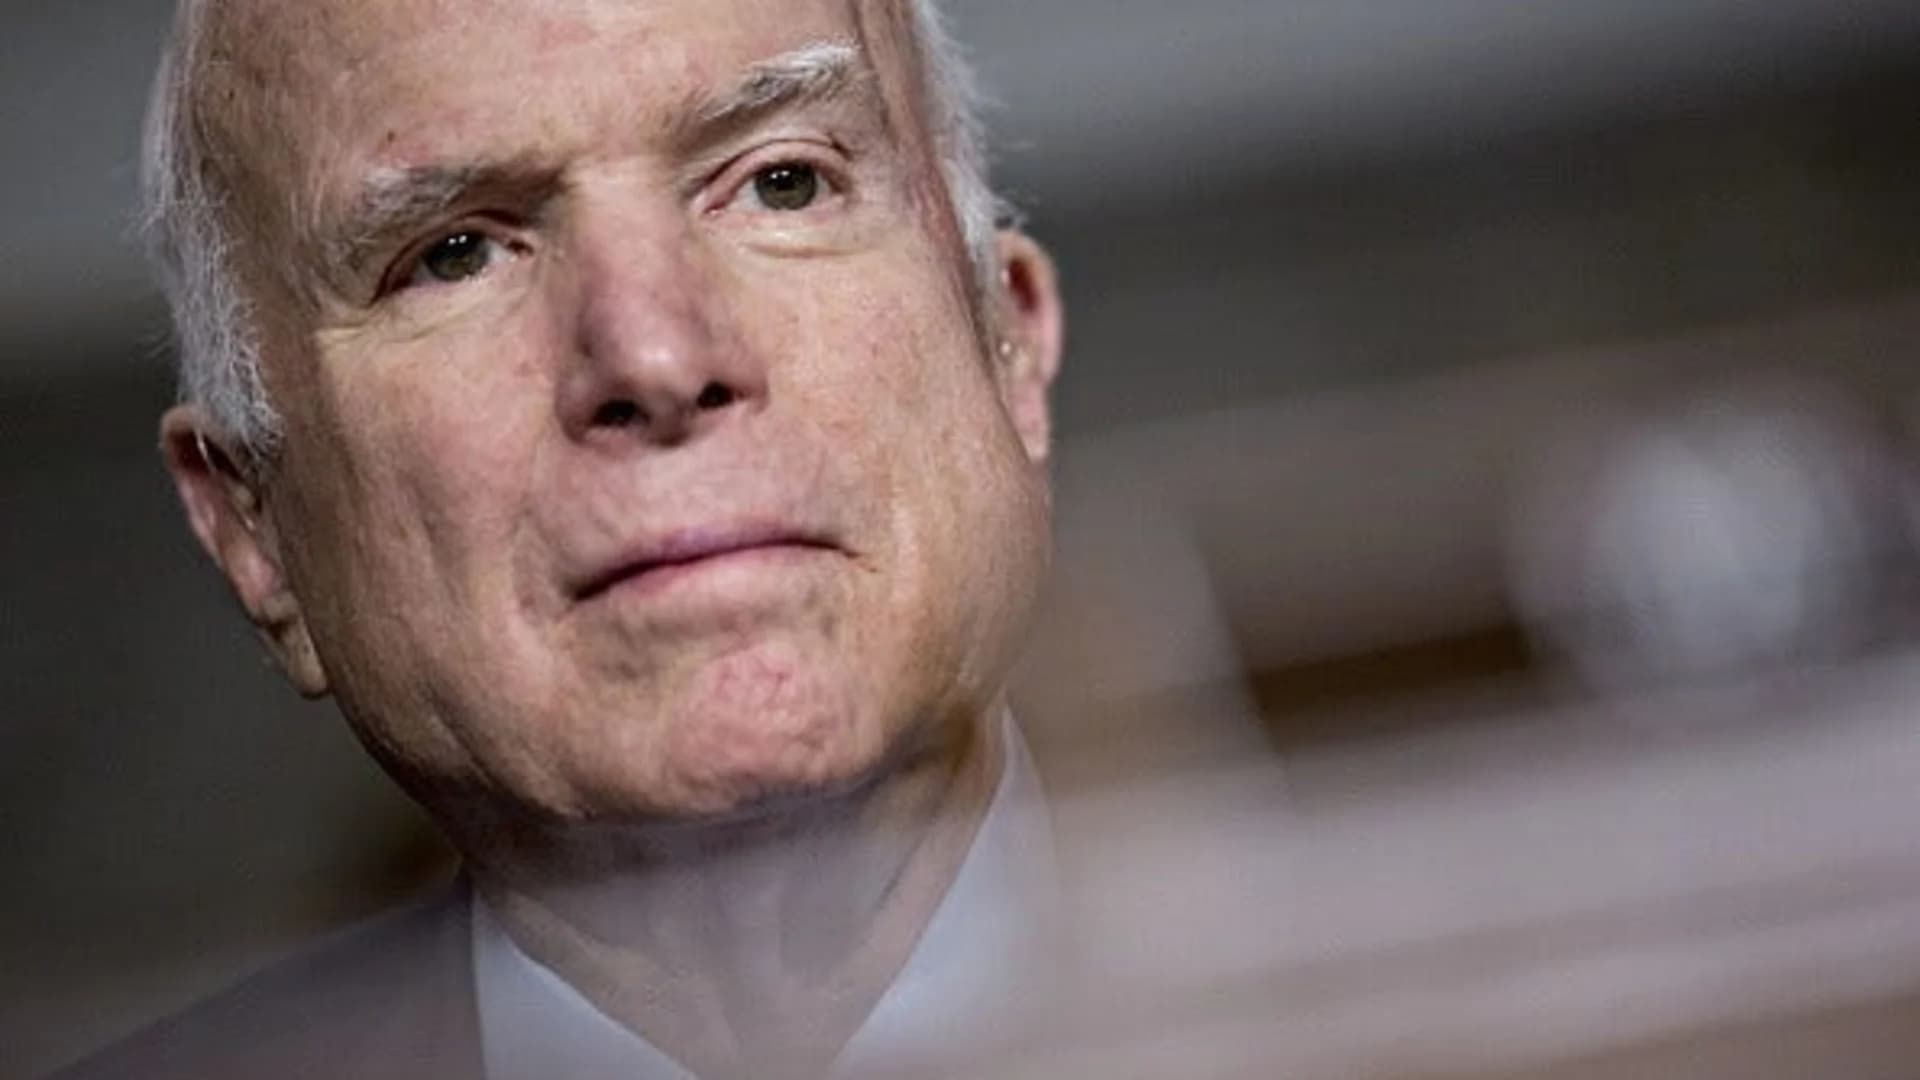 #N12BX: McCain says Trump not invited to funeral